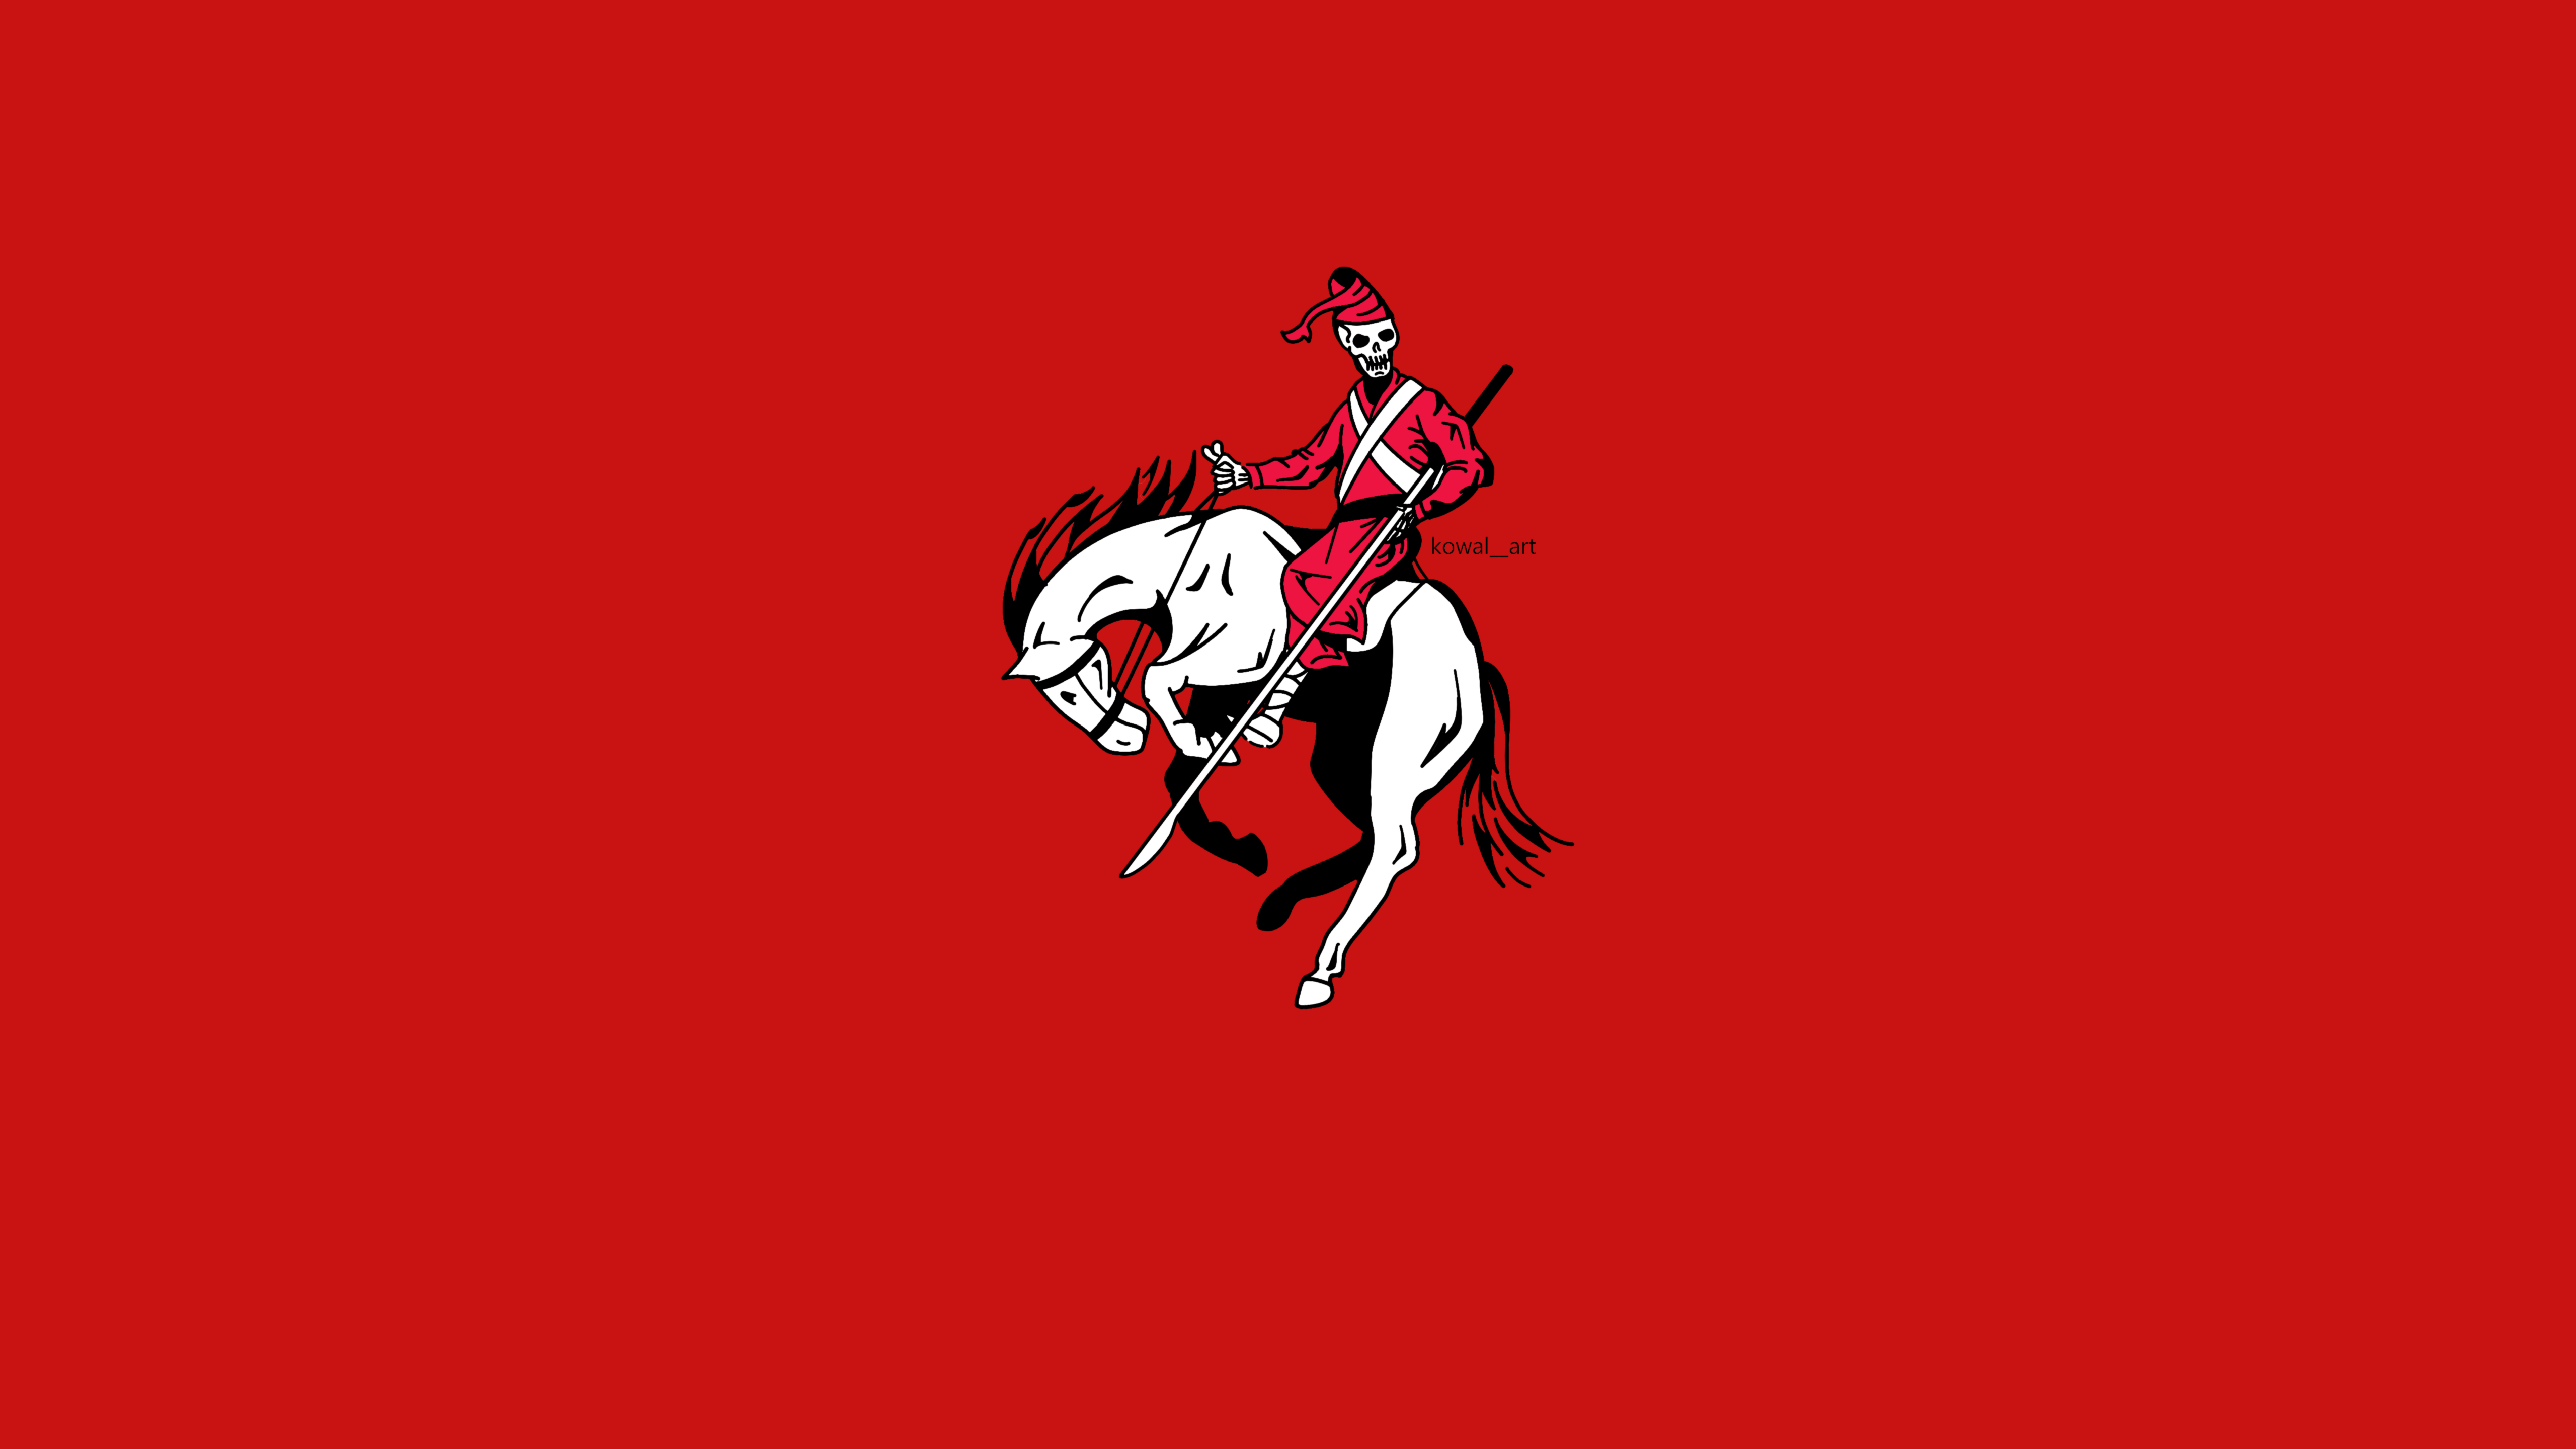 General 5120x2880 simple background warrior soldier Argentina KowalArt minimalism red background horse horse riding